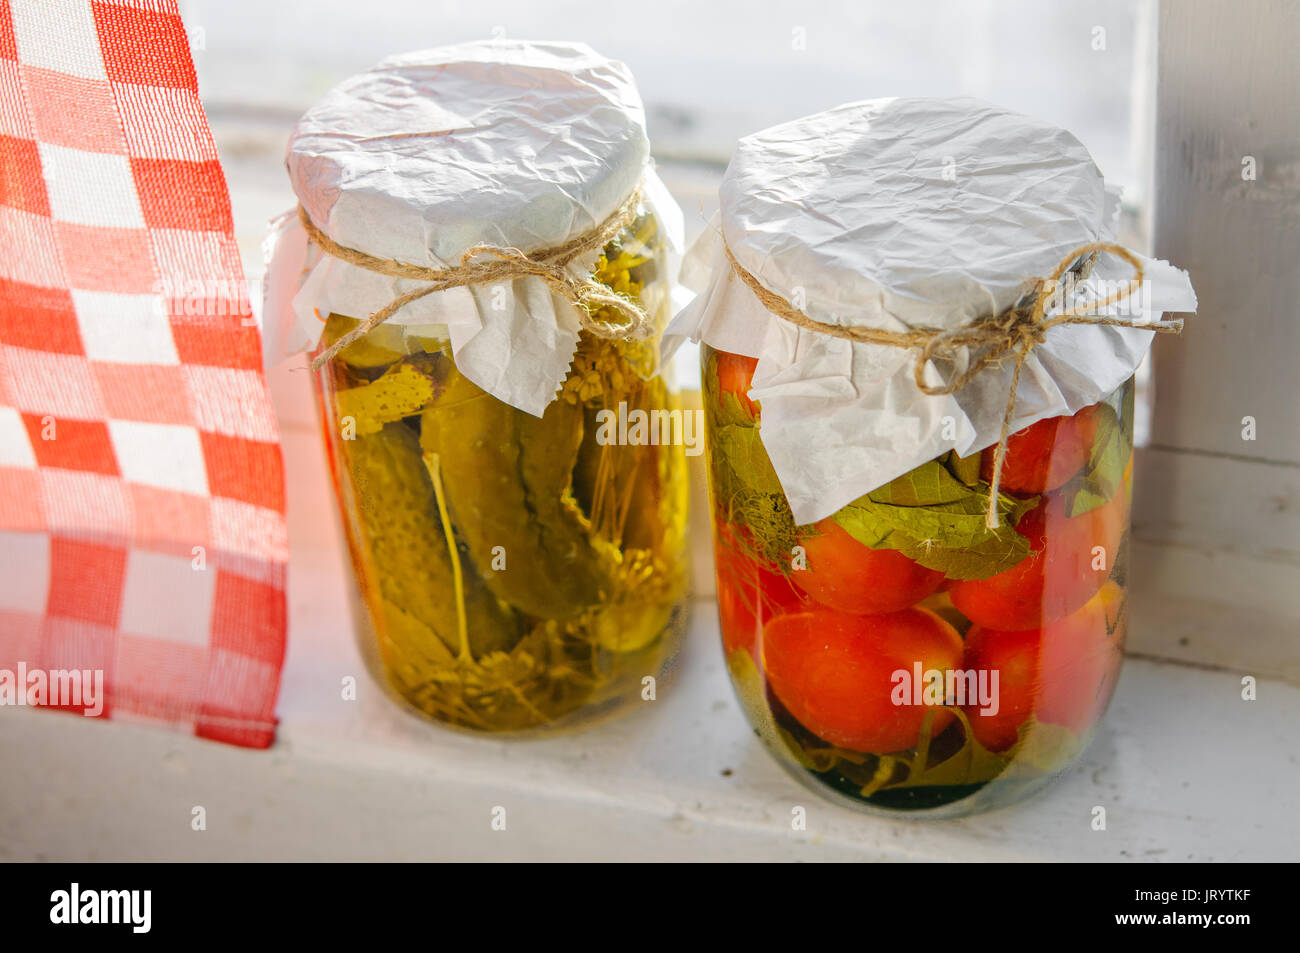 Clear glass jars of pickled vegetables at window sill: tomatoes and cucumbers in rustic style Stock Photo